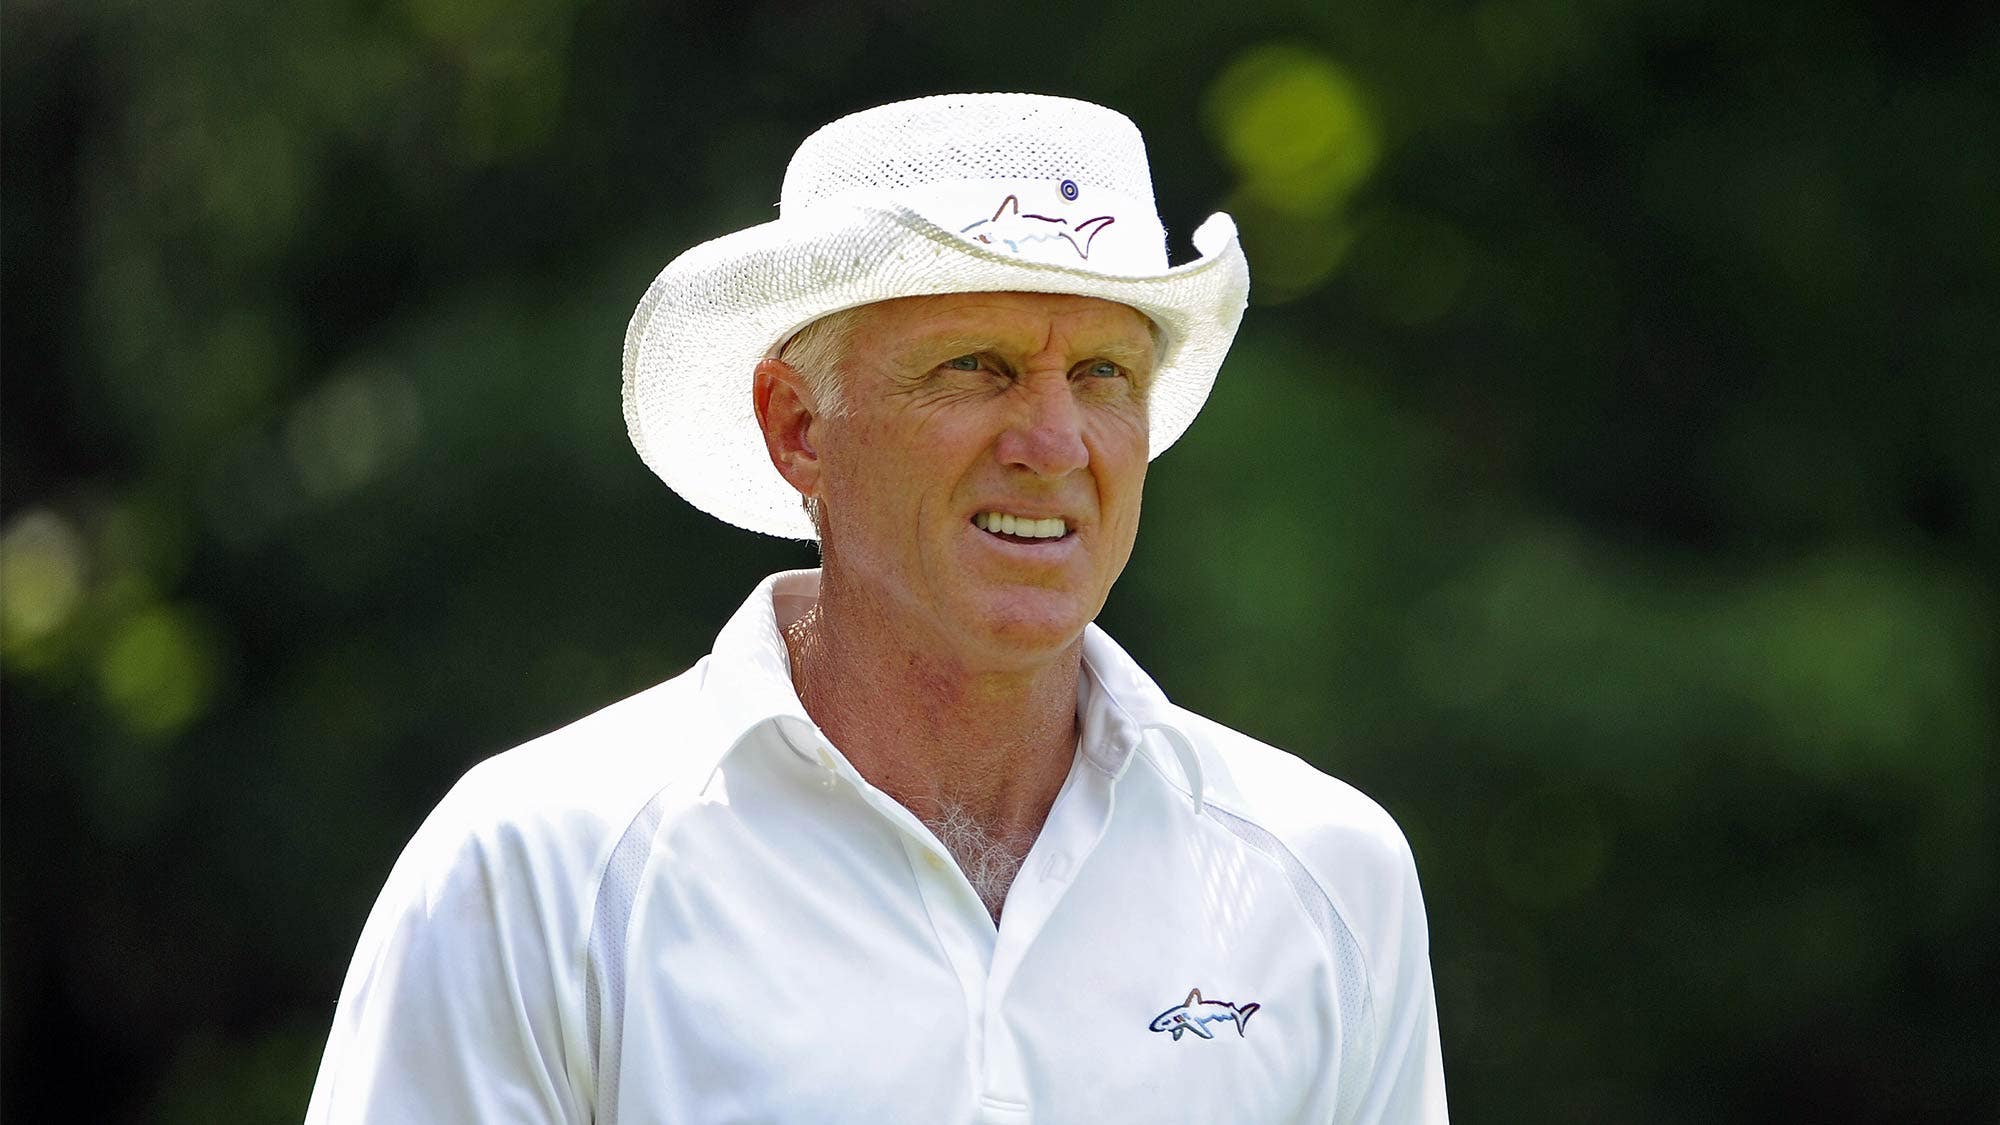 Greg Norman offers a warning during the ‘hideous’ COVID-19 battle